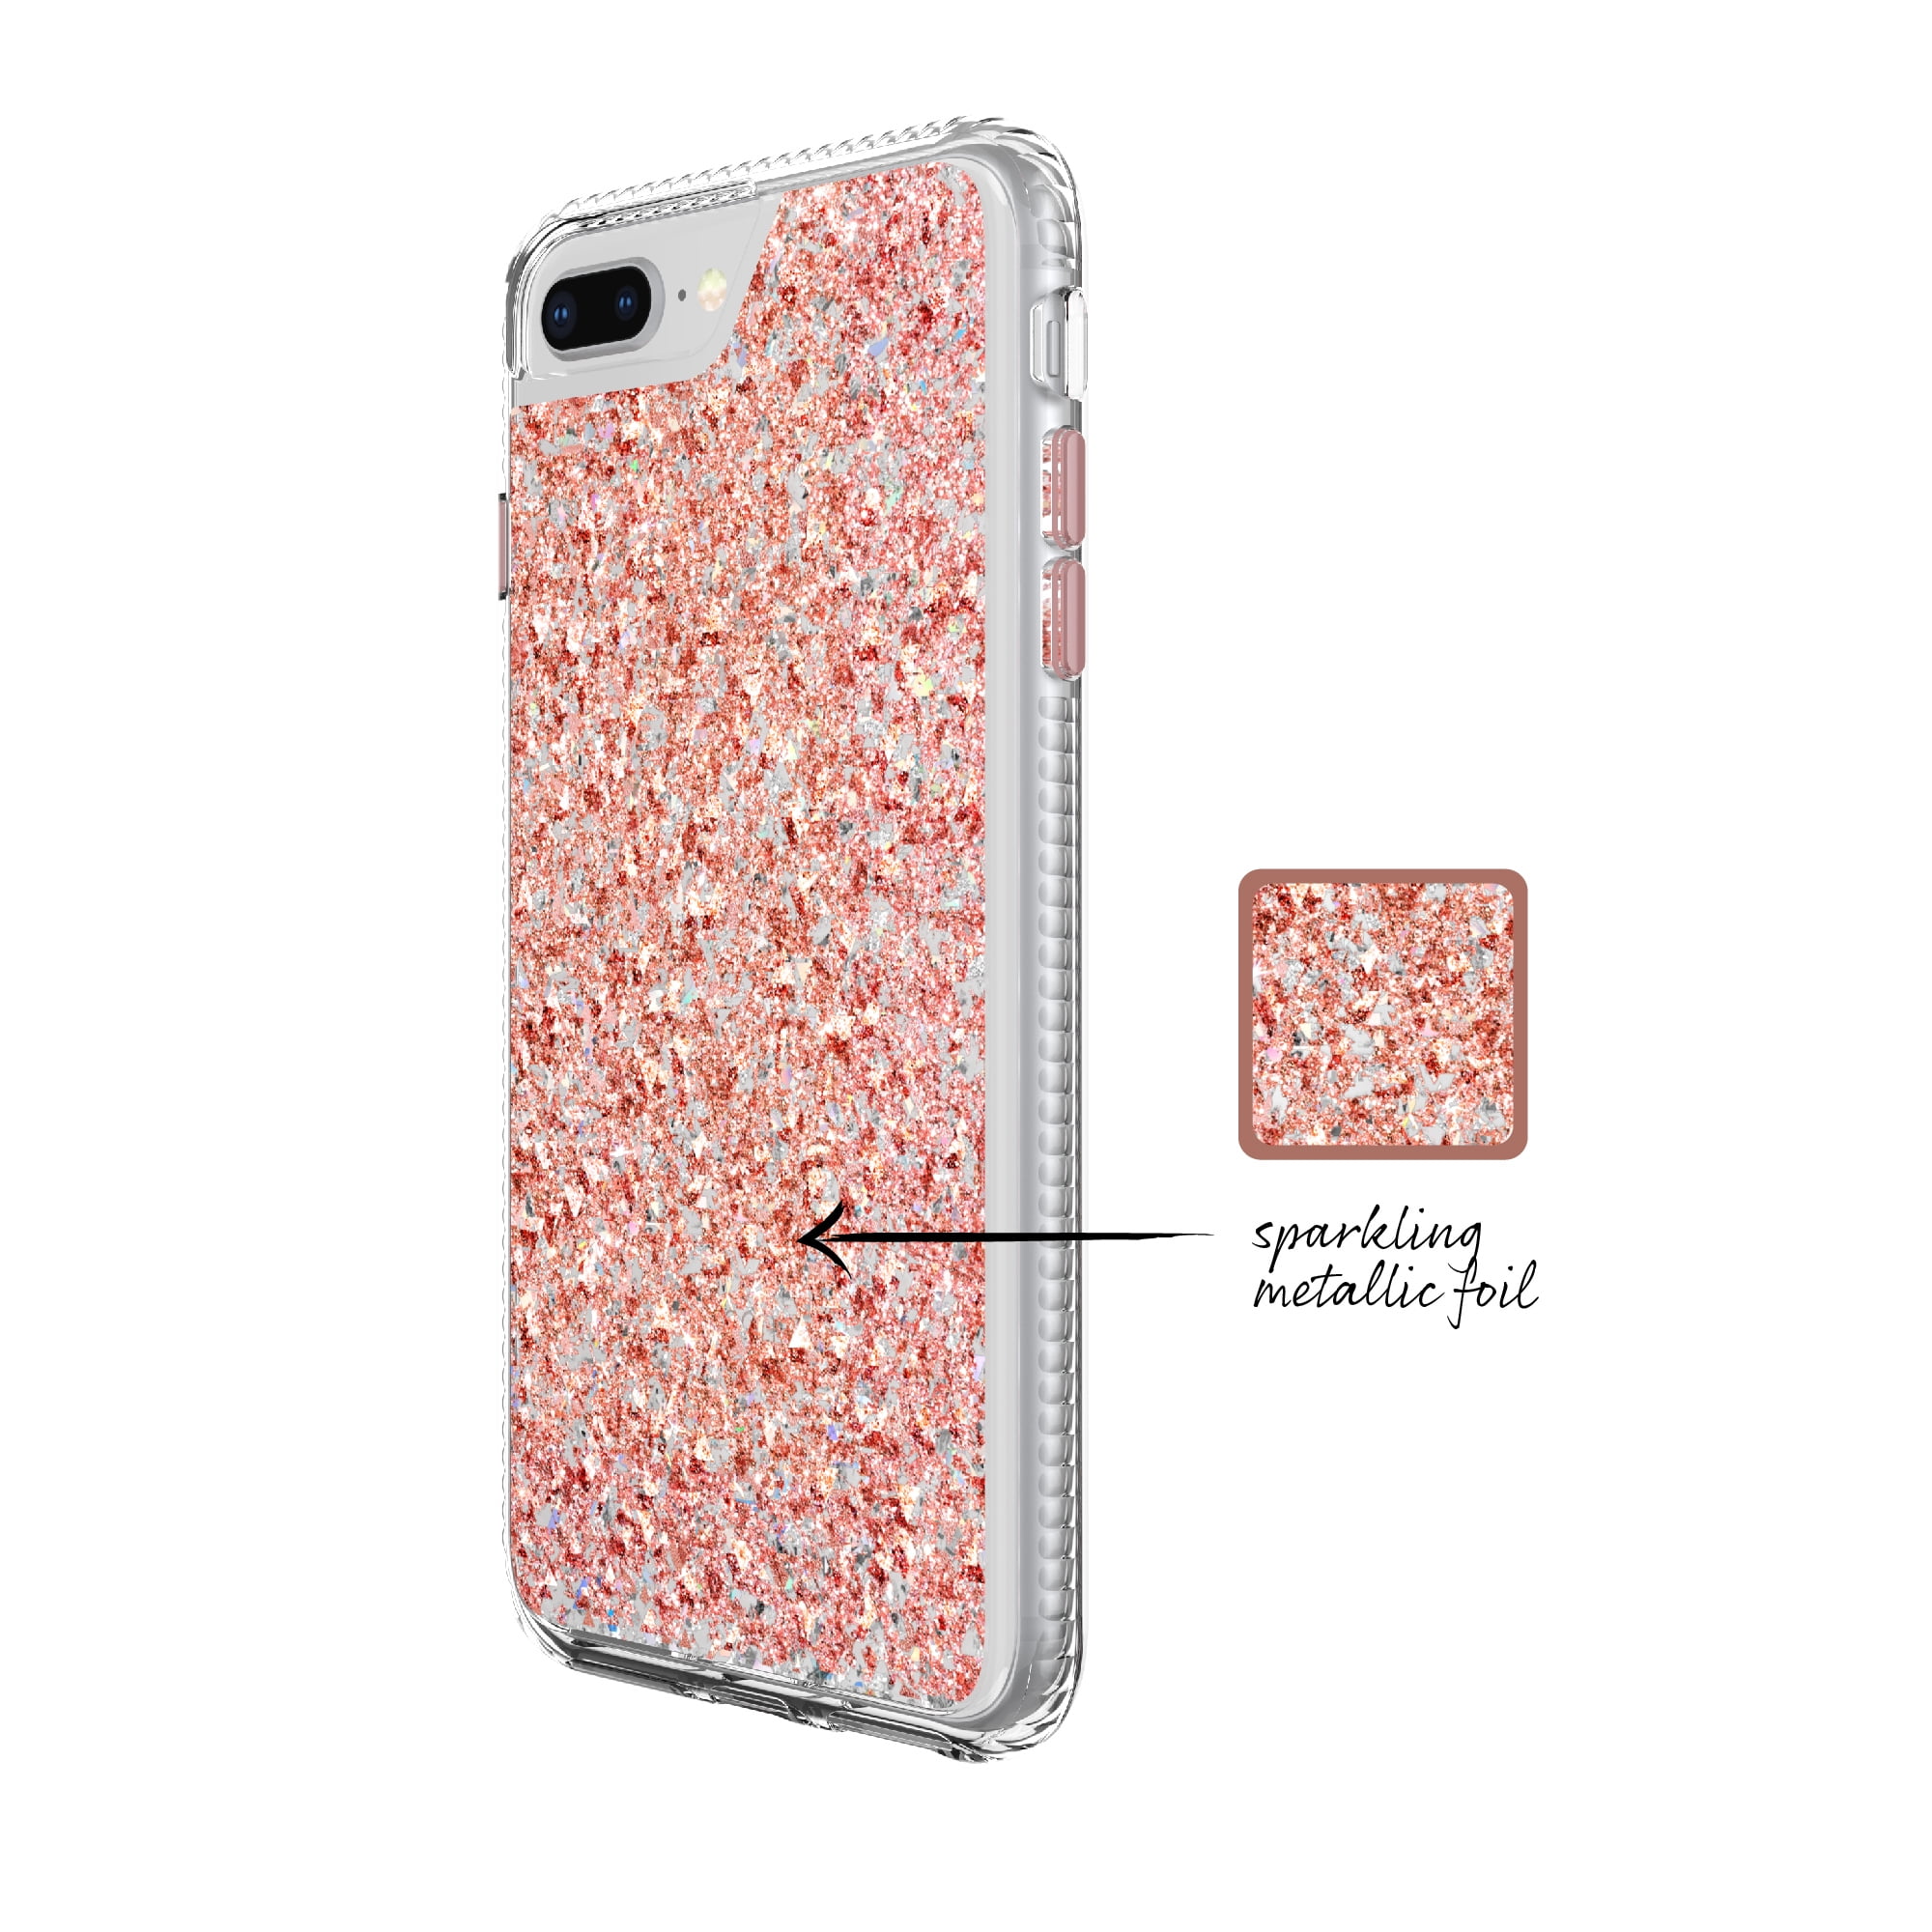 Blush Gold Fleck Case for iPhone 6 iPhone 6s Plus, iPhone 7 Plus, iPhone Plus - Walmart.com